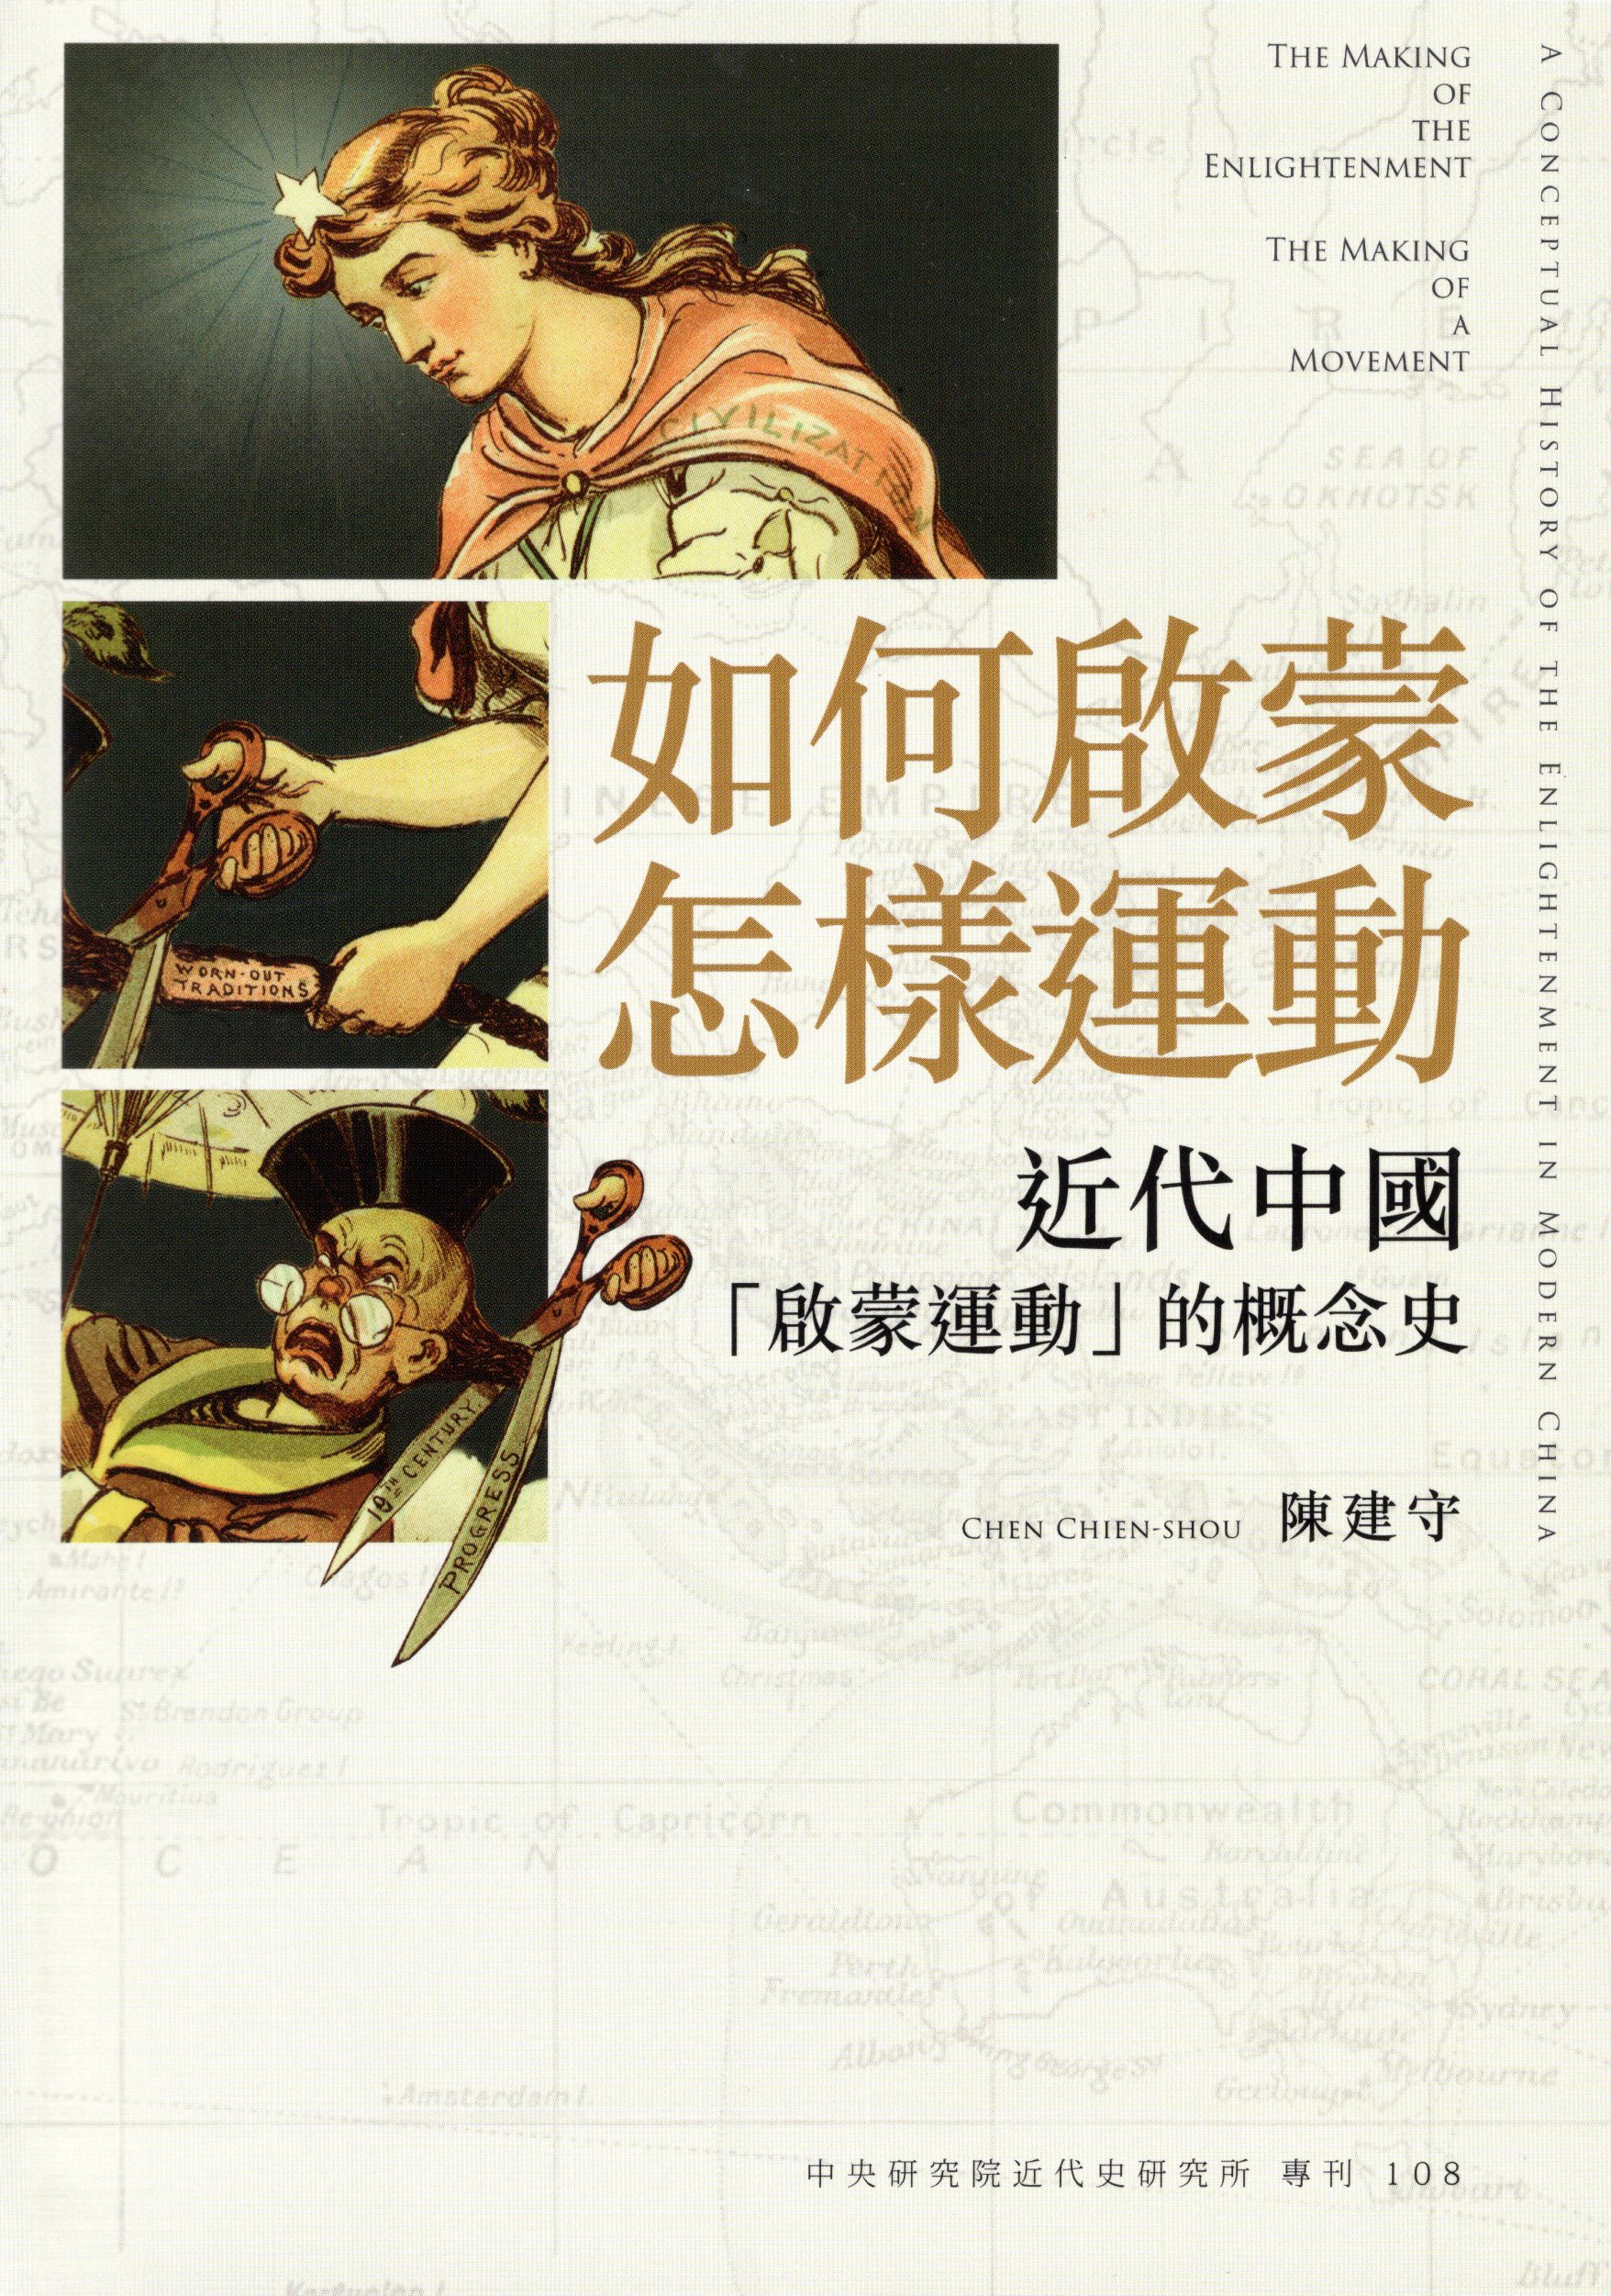 The Making of the Enlightenment, The Making of a Movement: A Conceptual History of the Enlightenment in Modern China